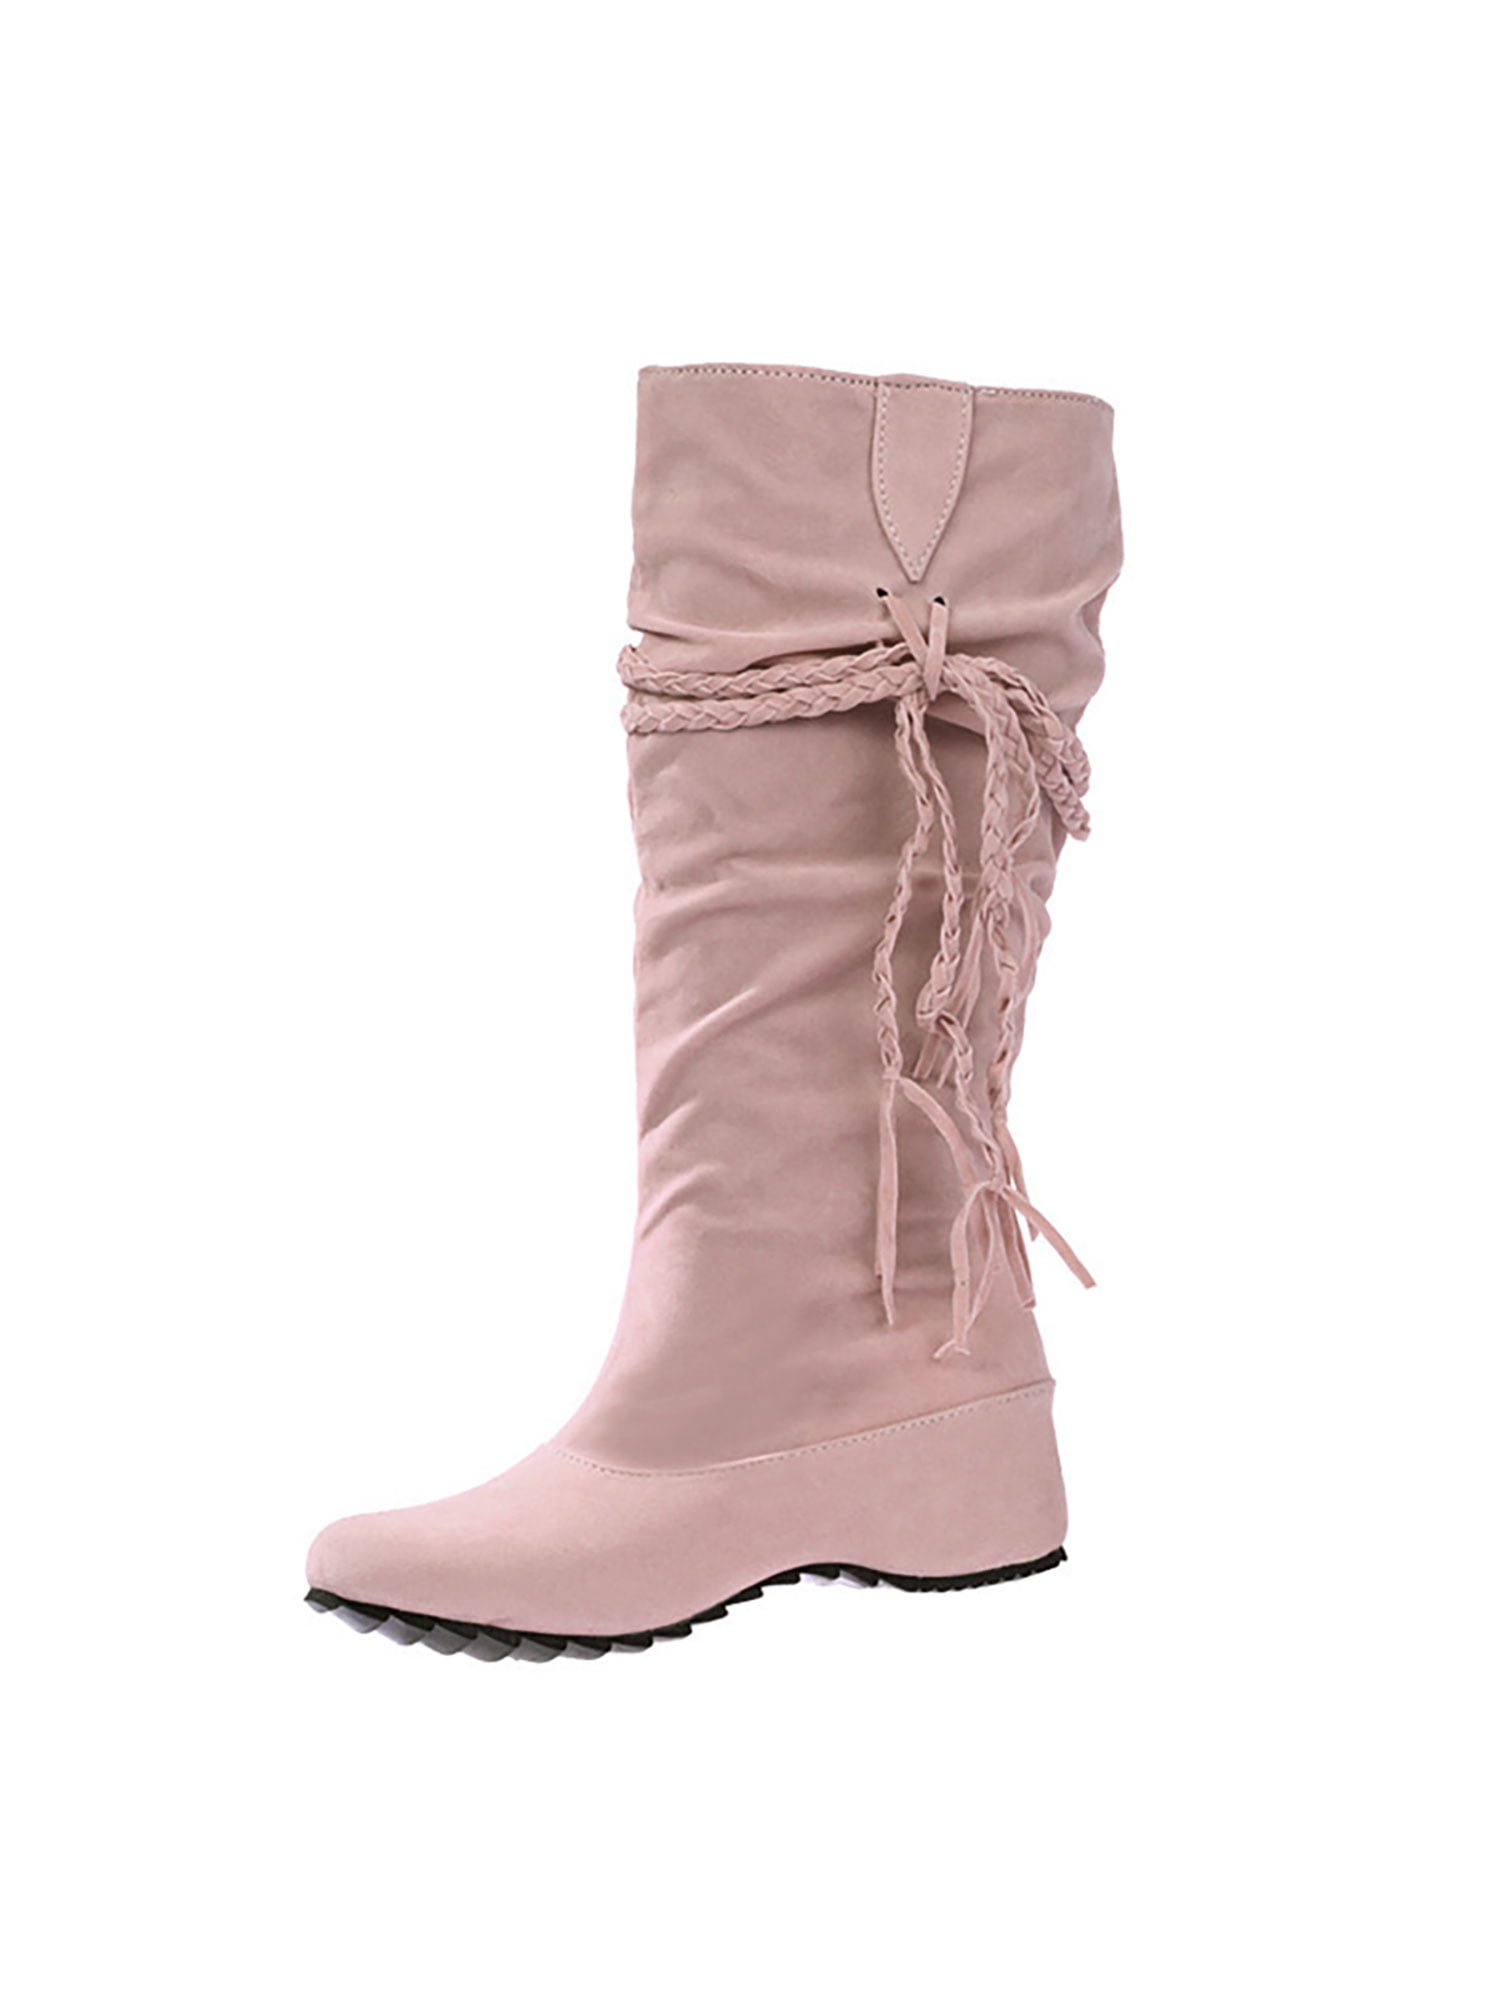 Ymiytan Women\'s Slouchy Pull On Knee High Boots Winter Flat Fashion Boot  Pink 6.5